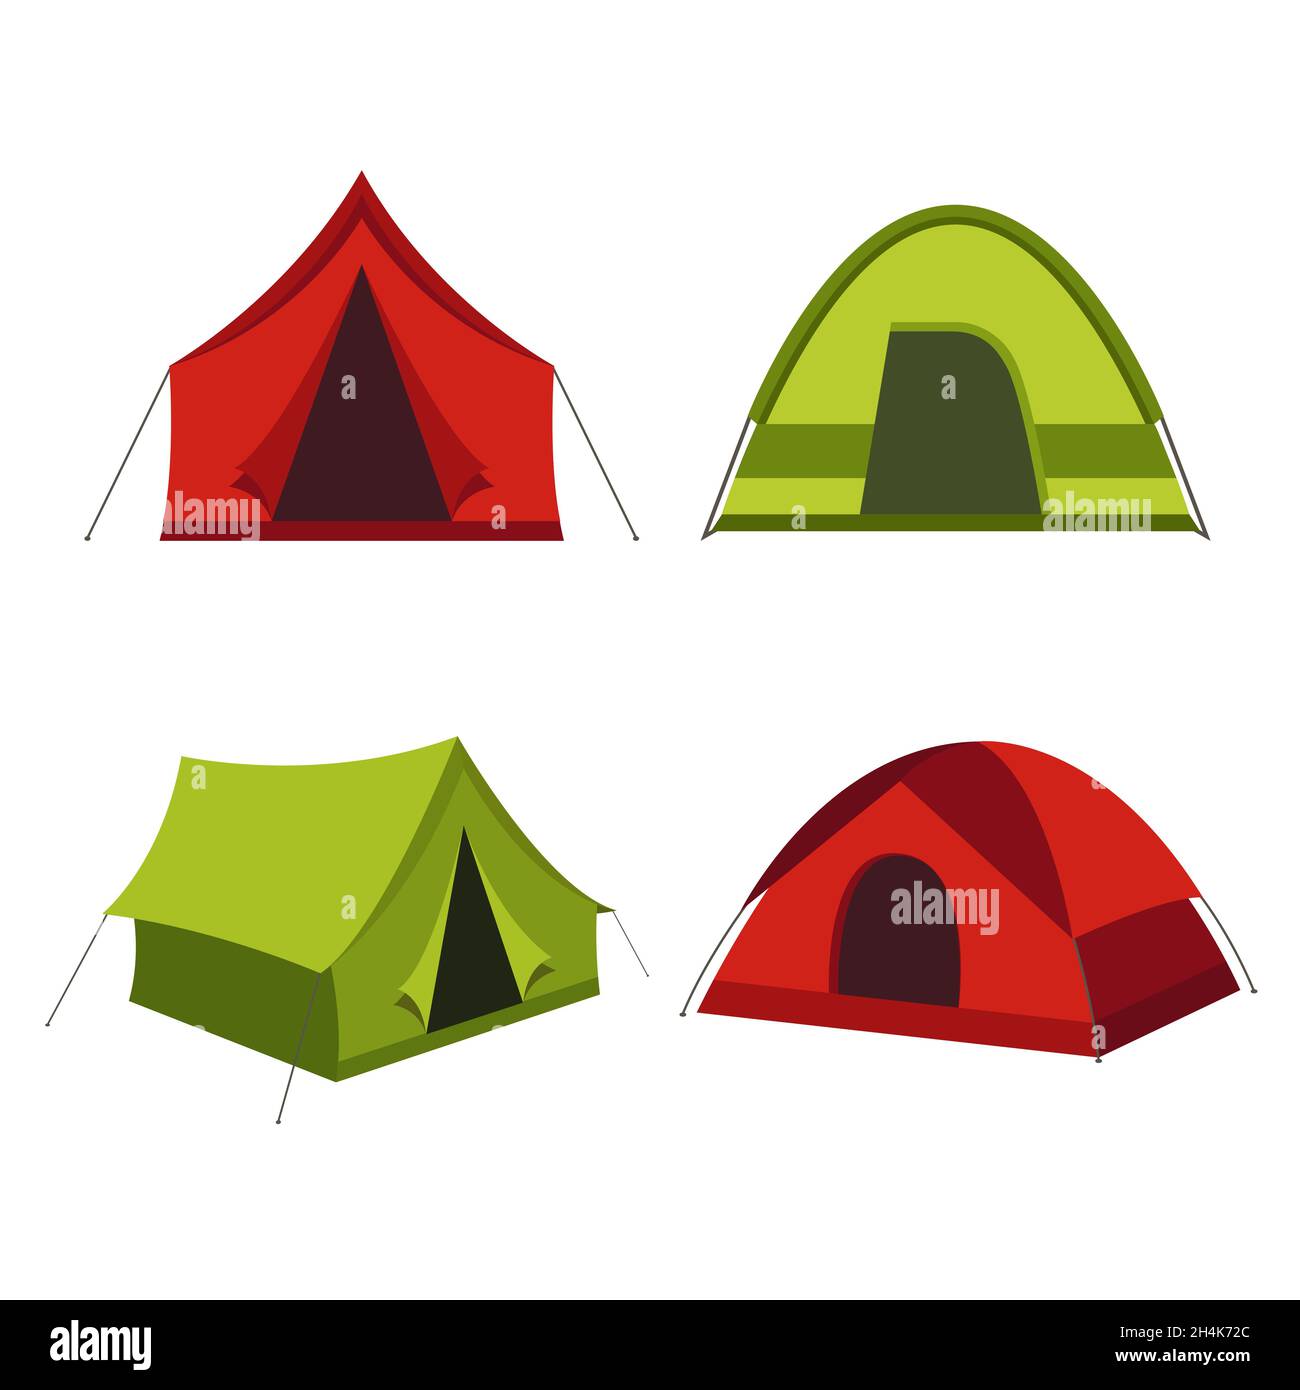 Camping vector icons isolated on white background. Set of tourist camp tents in red and green colors Stock Vector & Art - Alamy